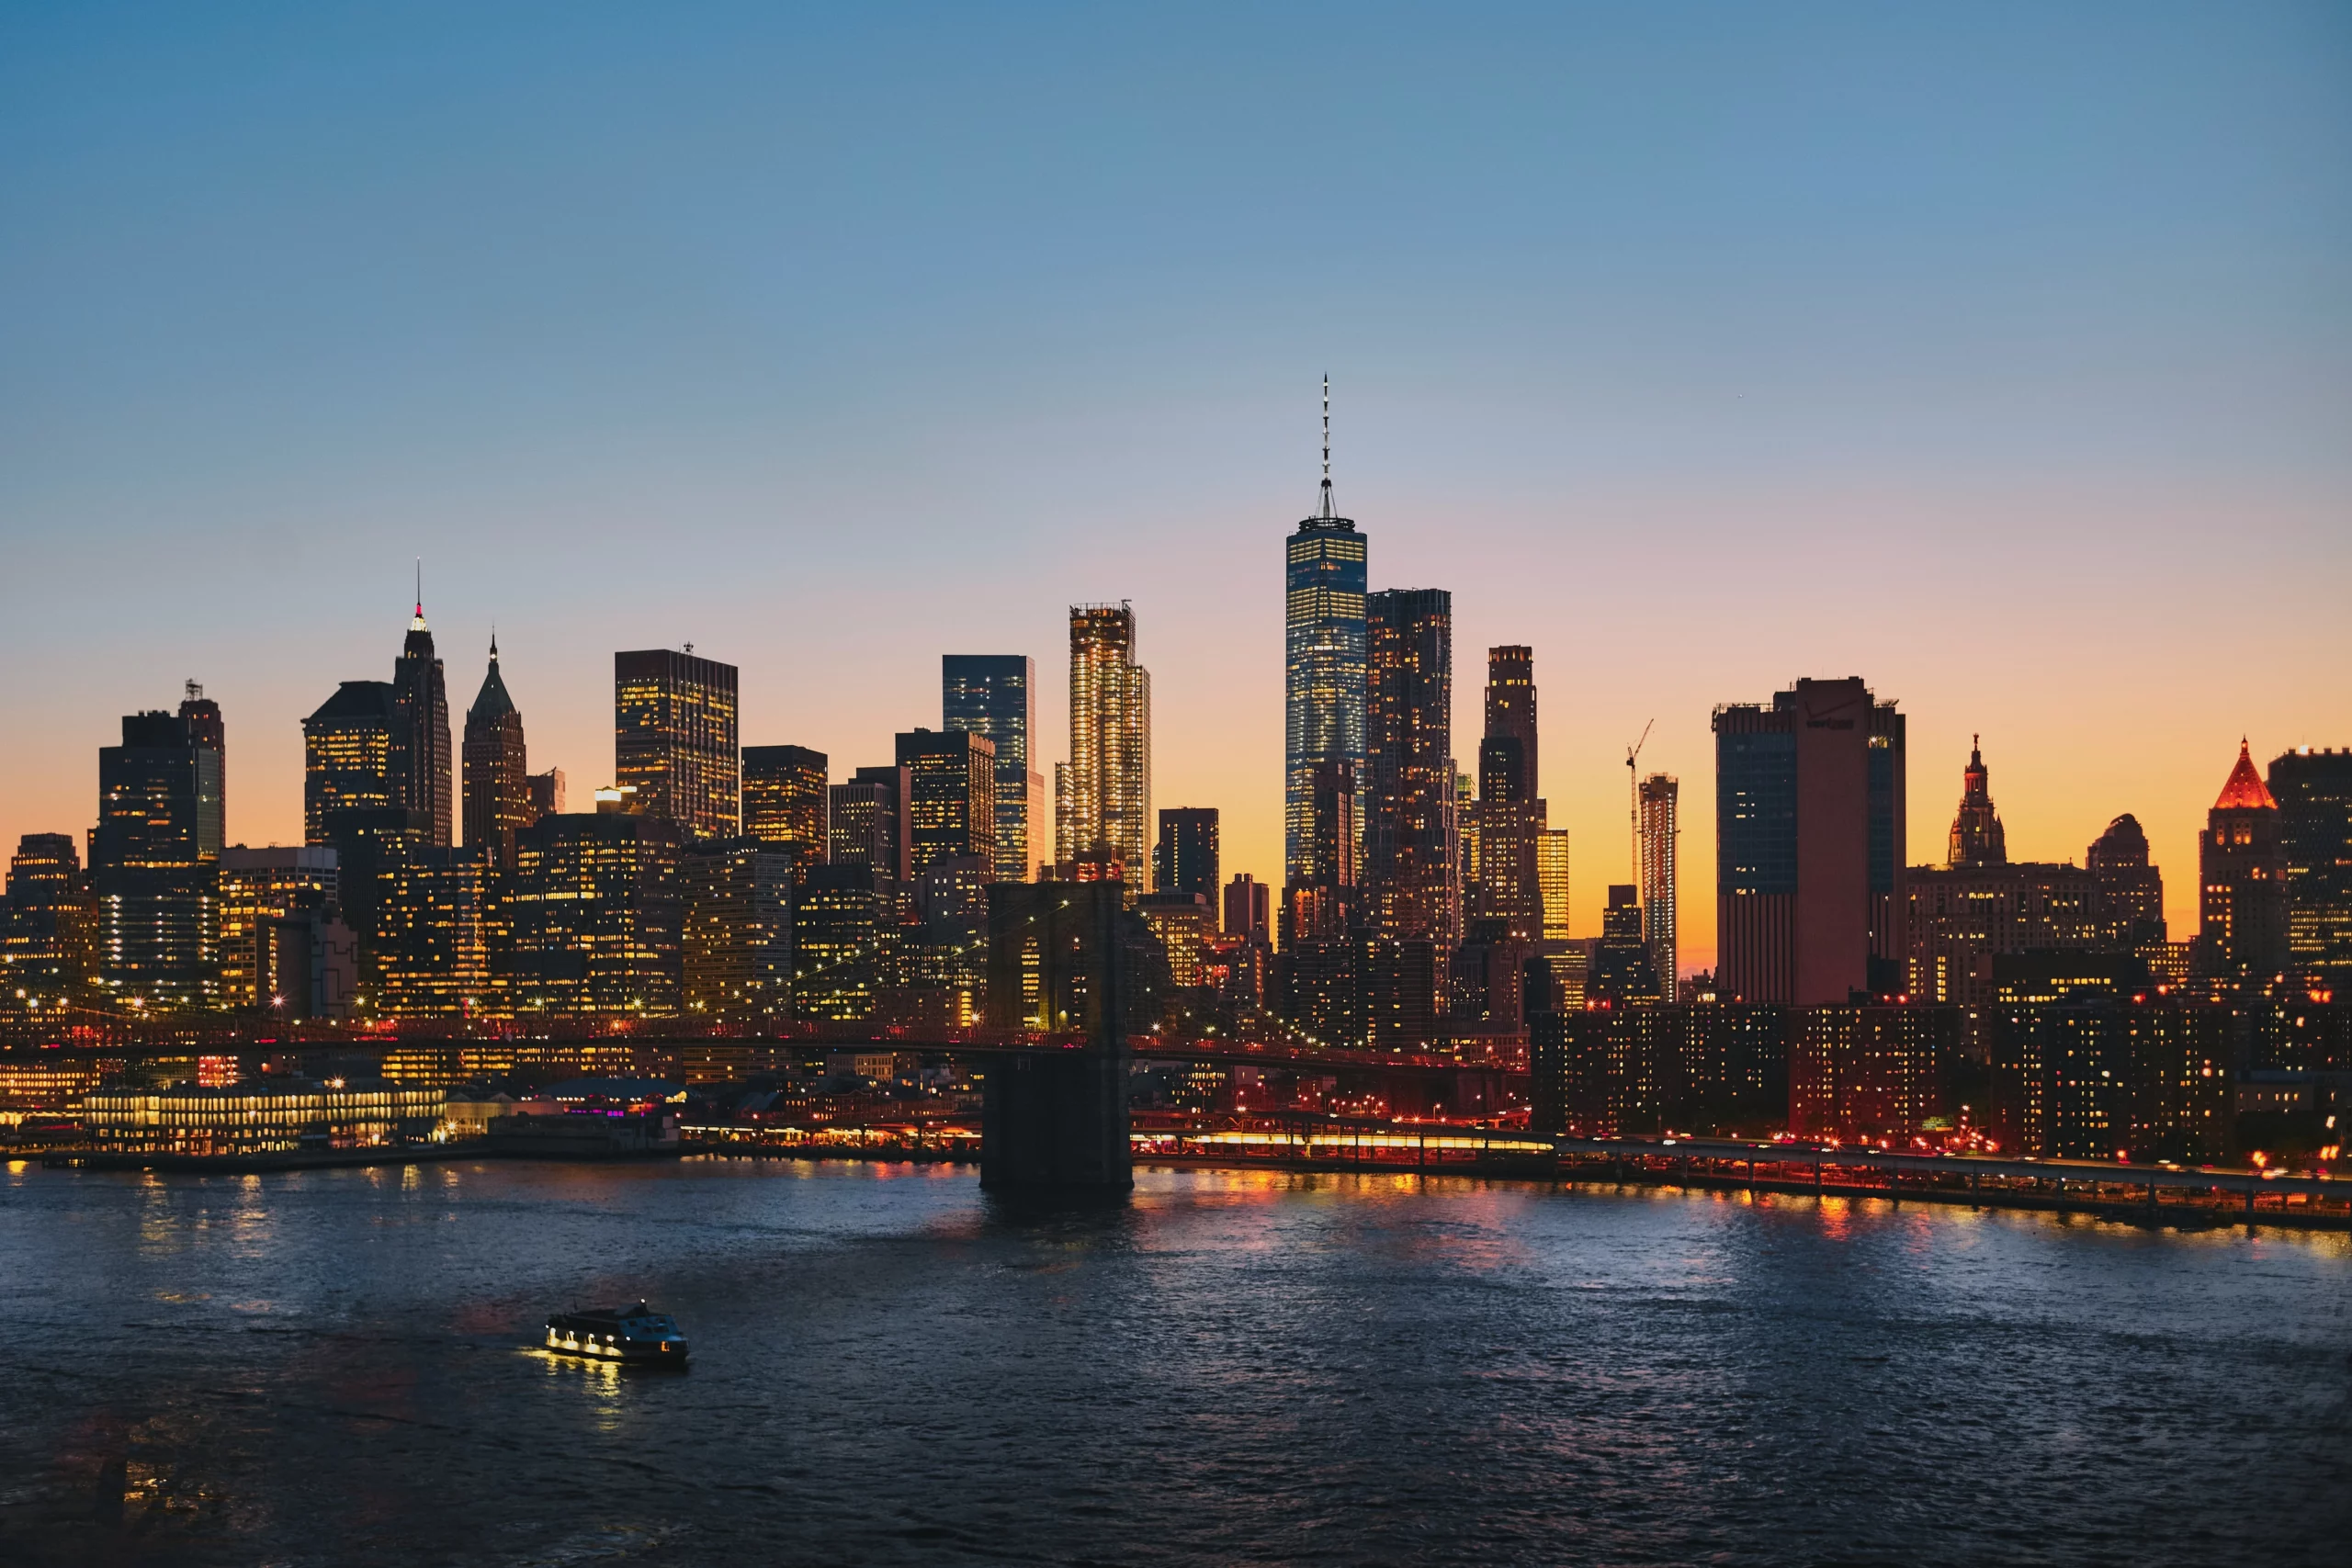 Skyline views at night of Manhattan and NYC highrises, luxury buildings, riverfront, and sunset dusk skies